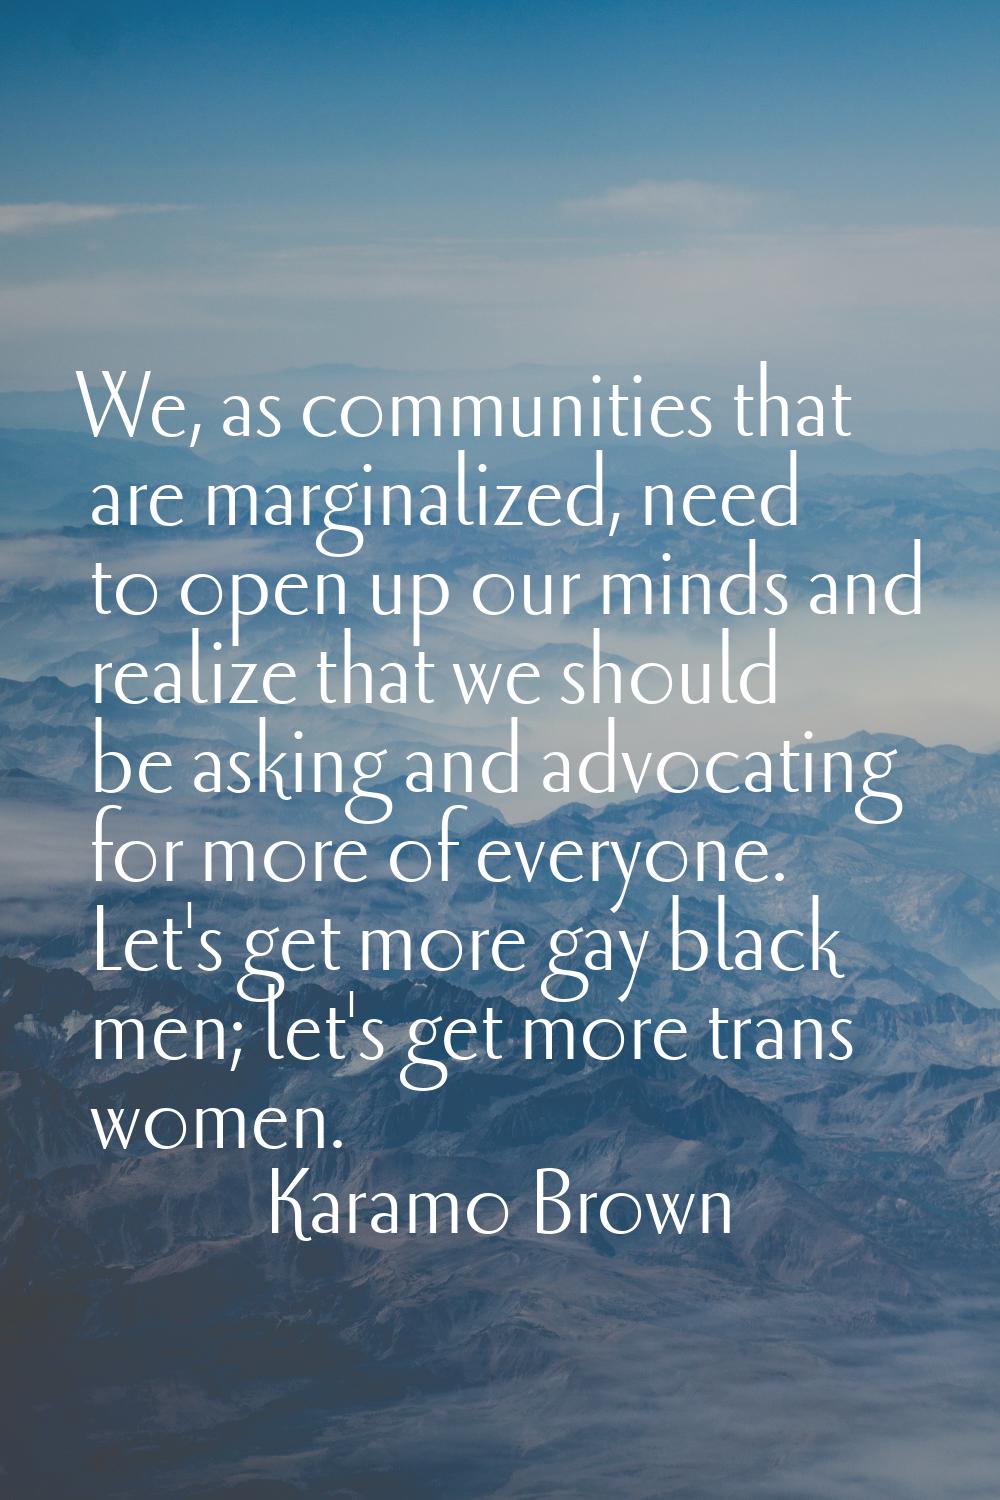 We, as communities that are marginalized, need to open up our minds and realize that we should be a